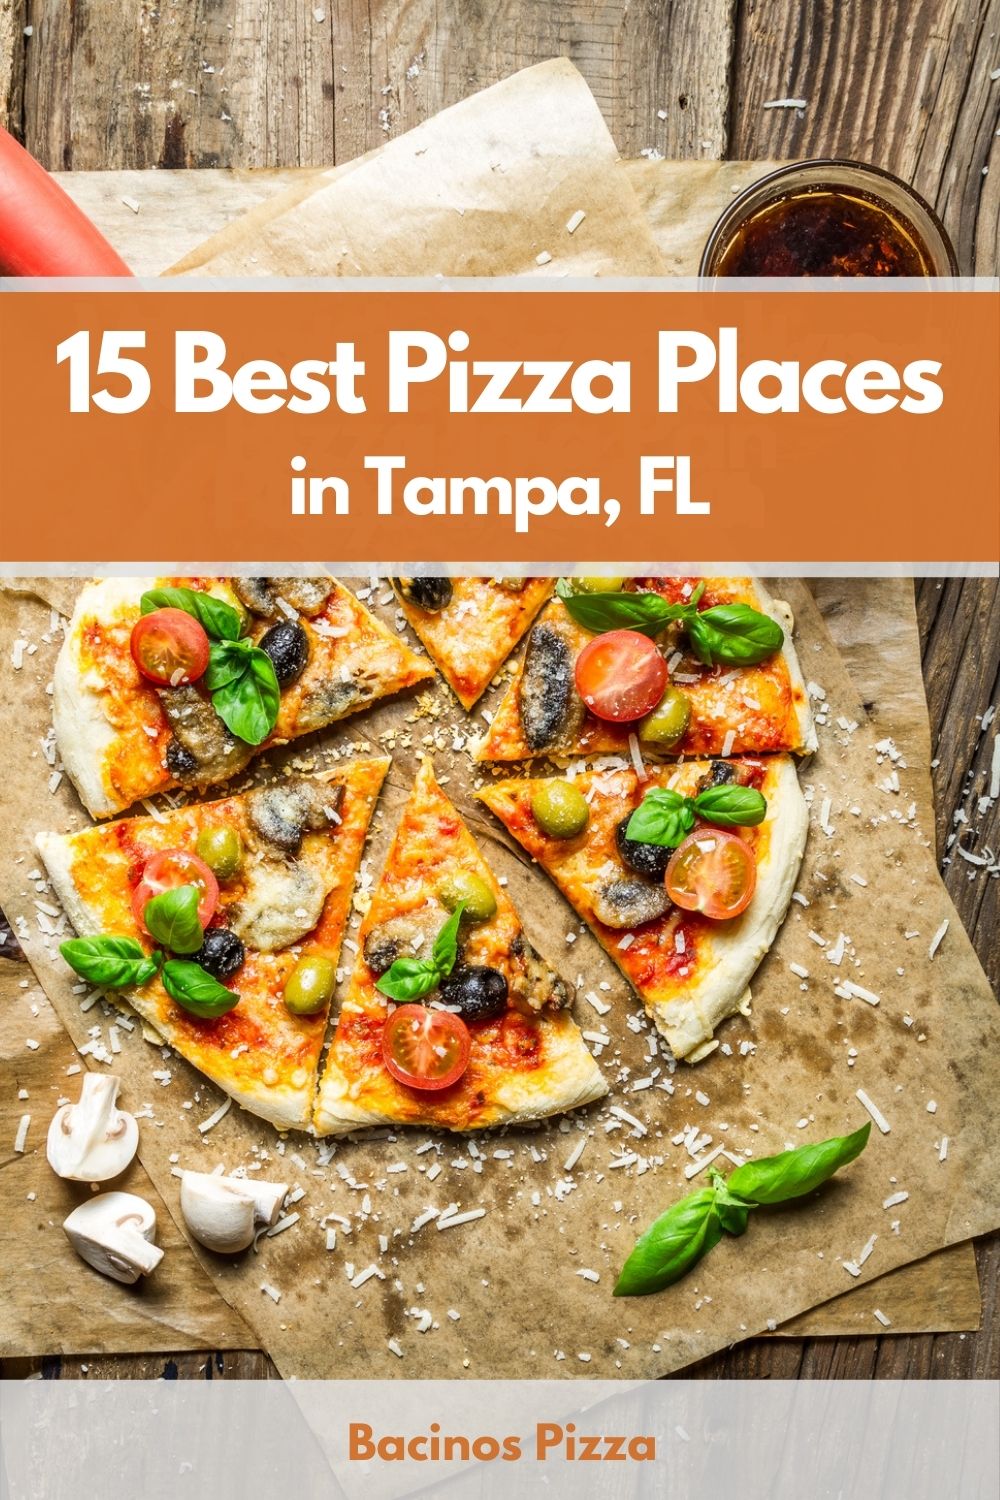 15 Best Pizza Places in Tampa, FL pin